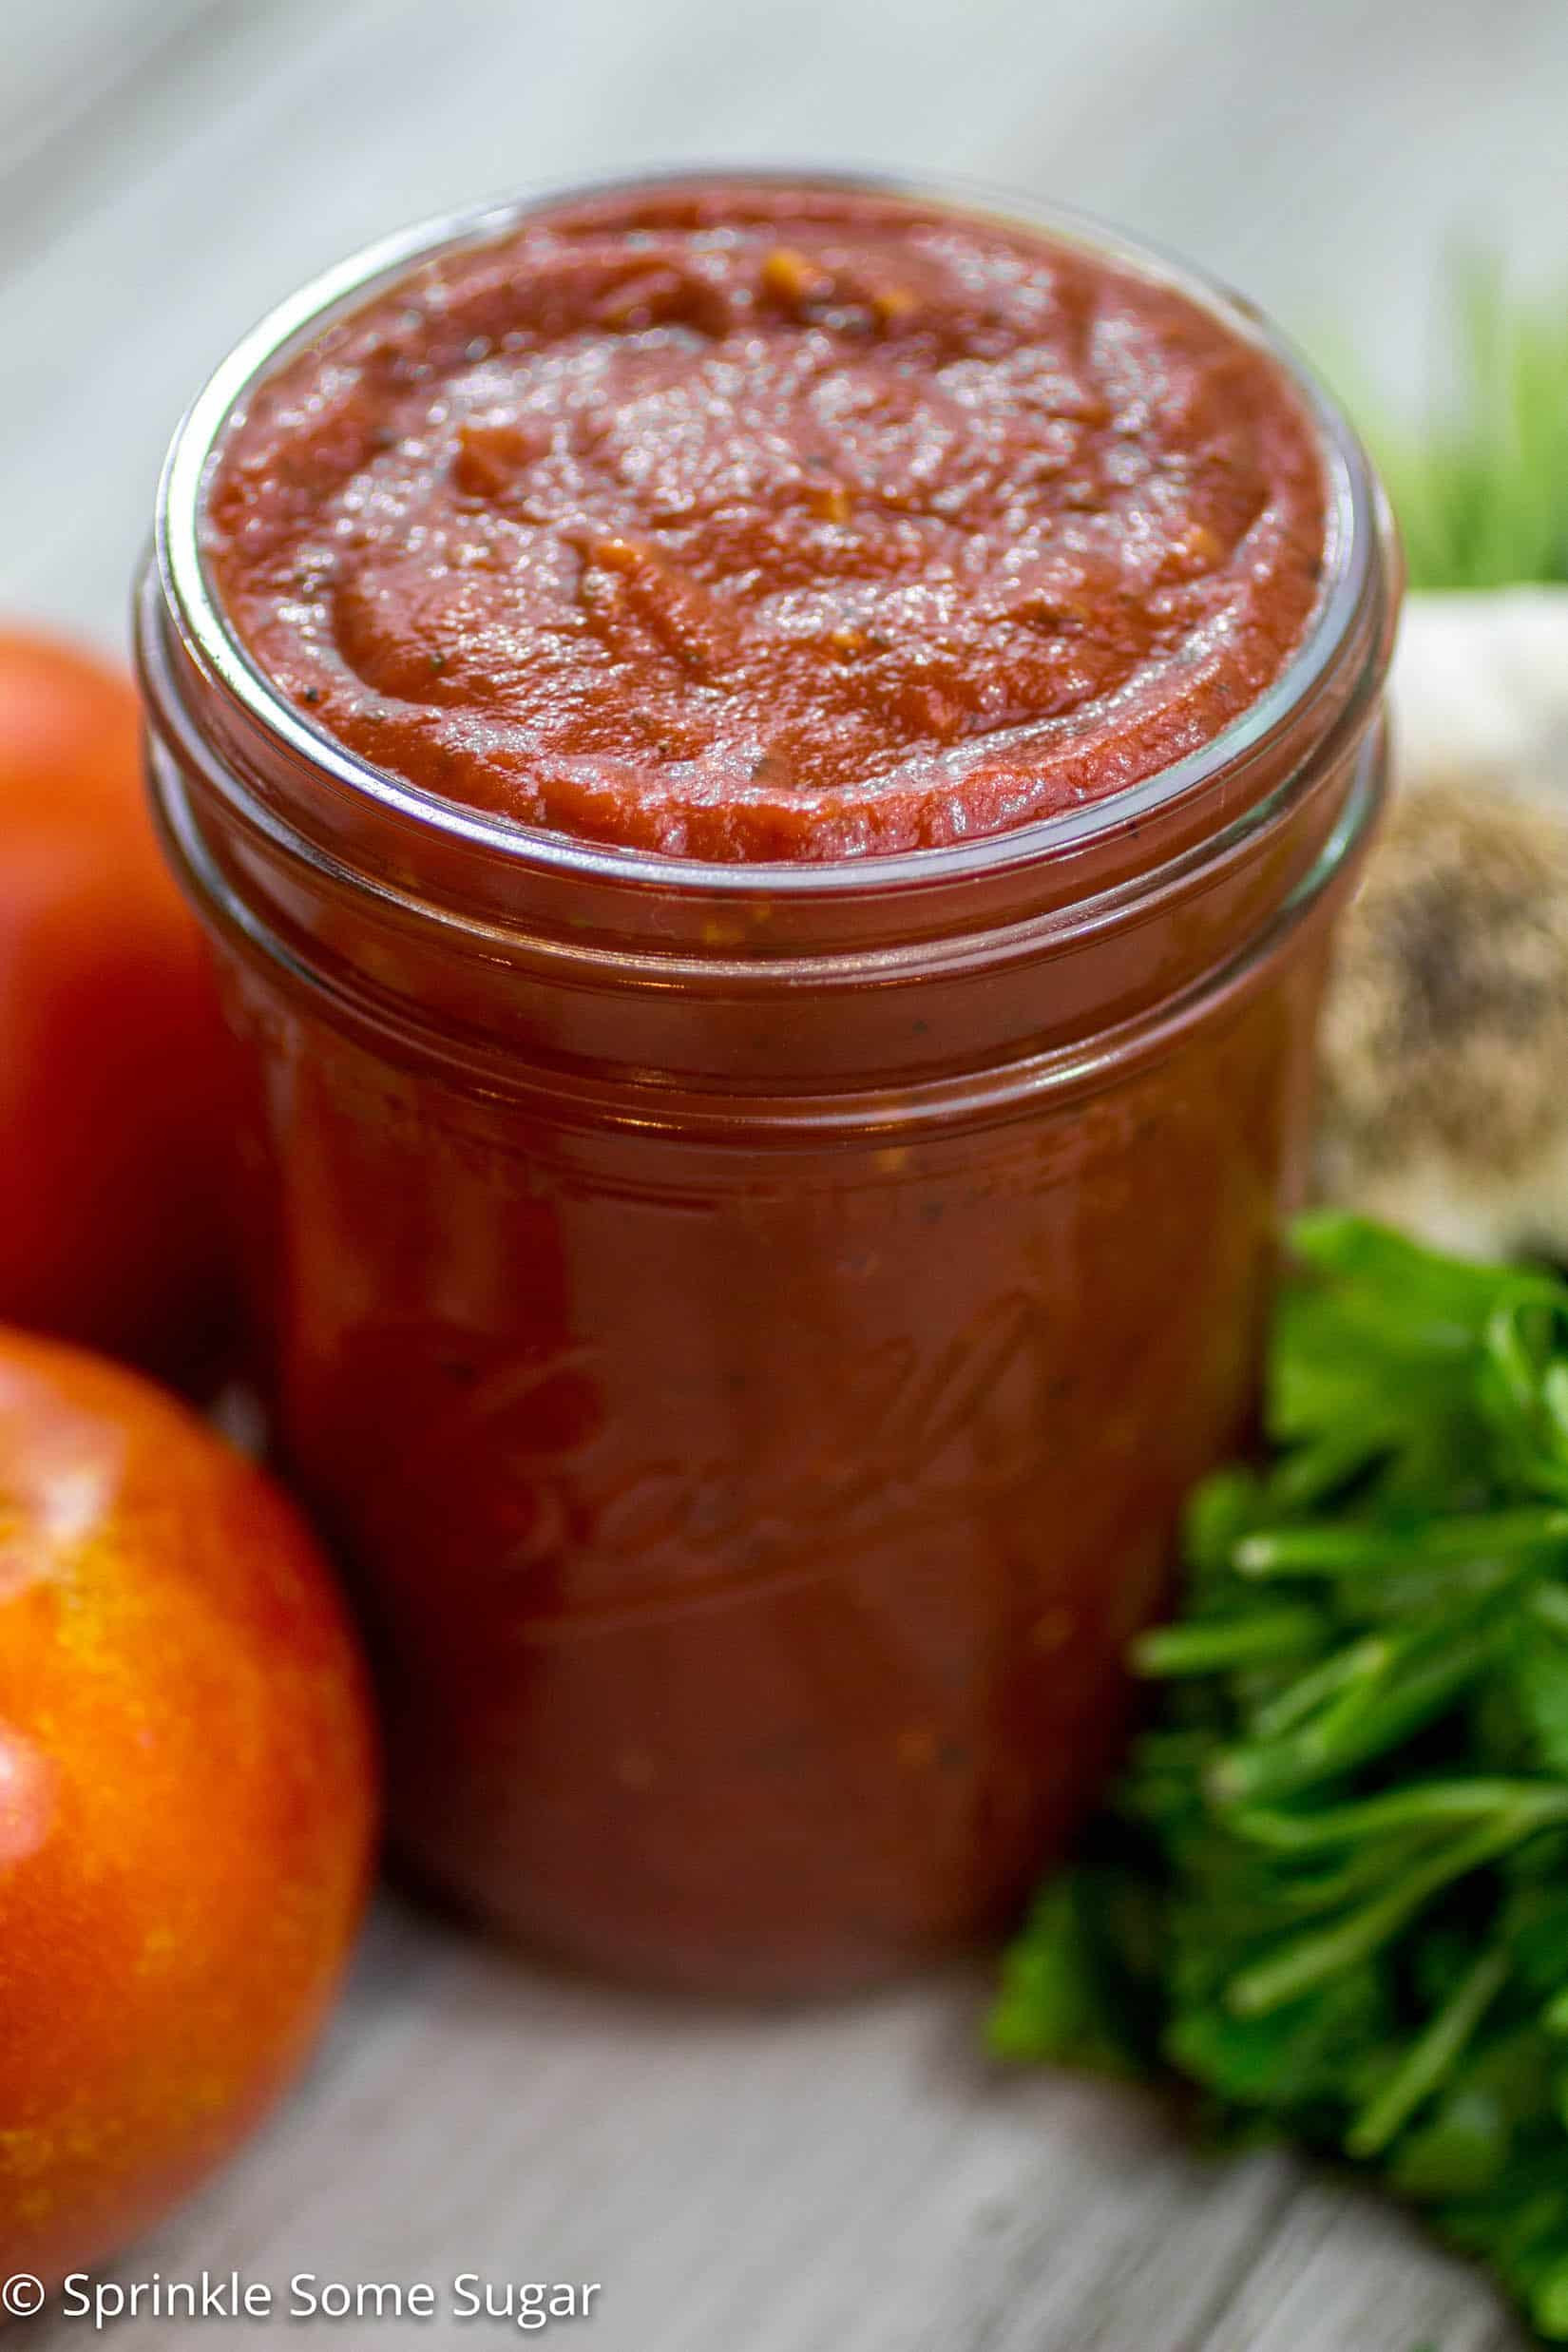 Best Sauce for Pizza Awesome the Best Homemade Pizza Sauce Sprinkle some Sugar